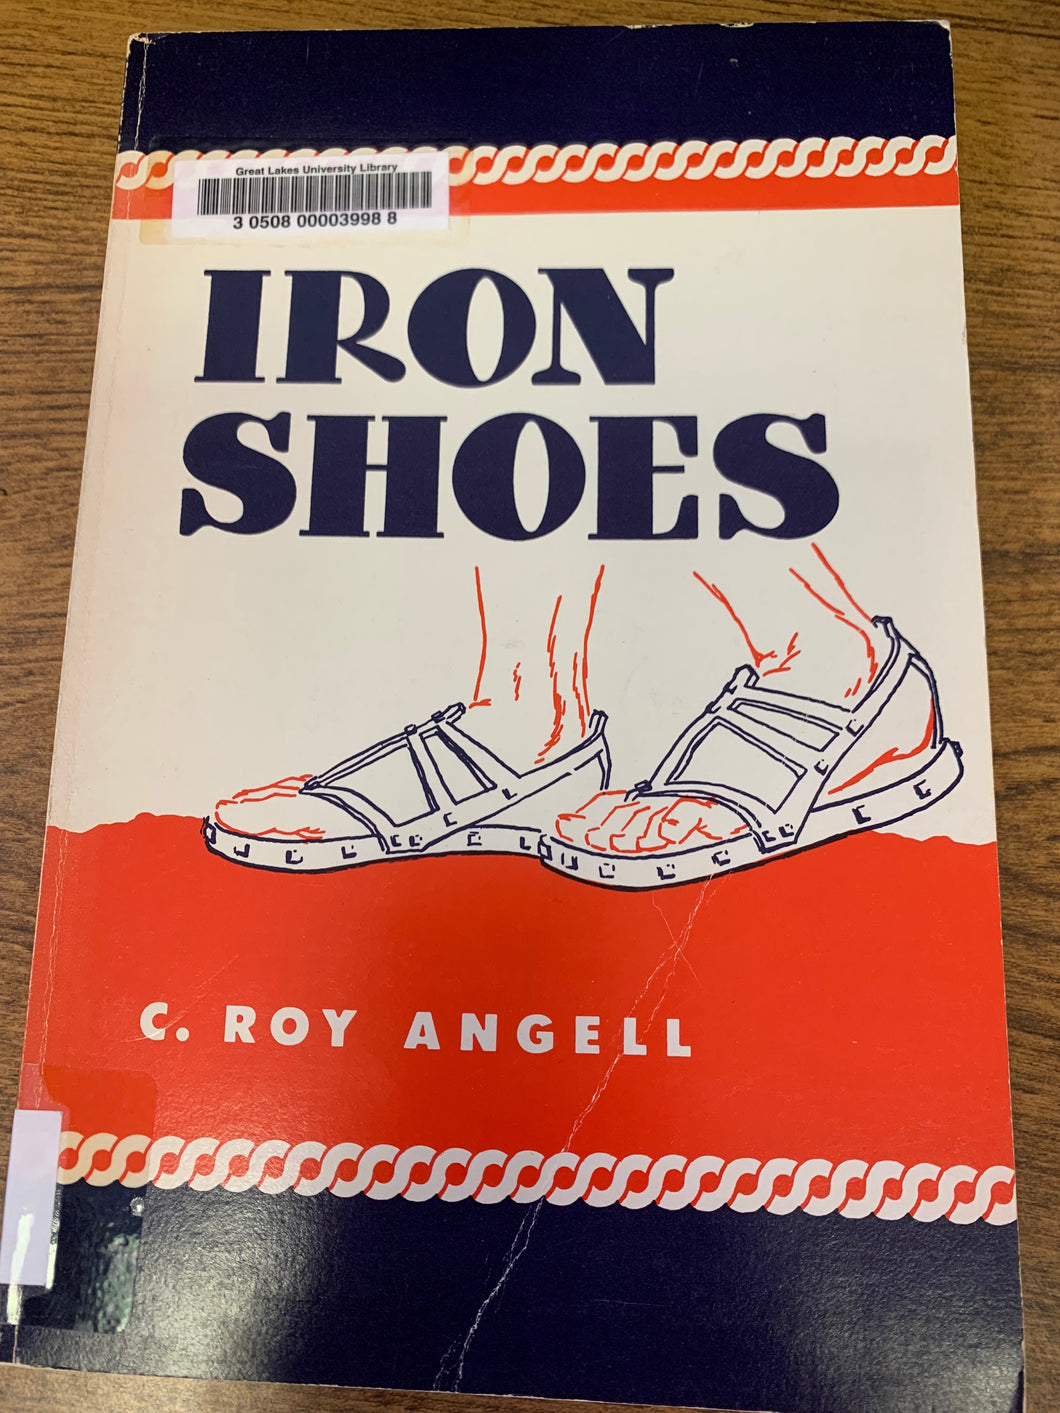 Iron Shoes by C. Roy Angell